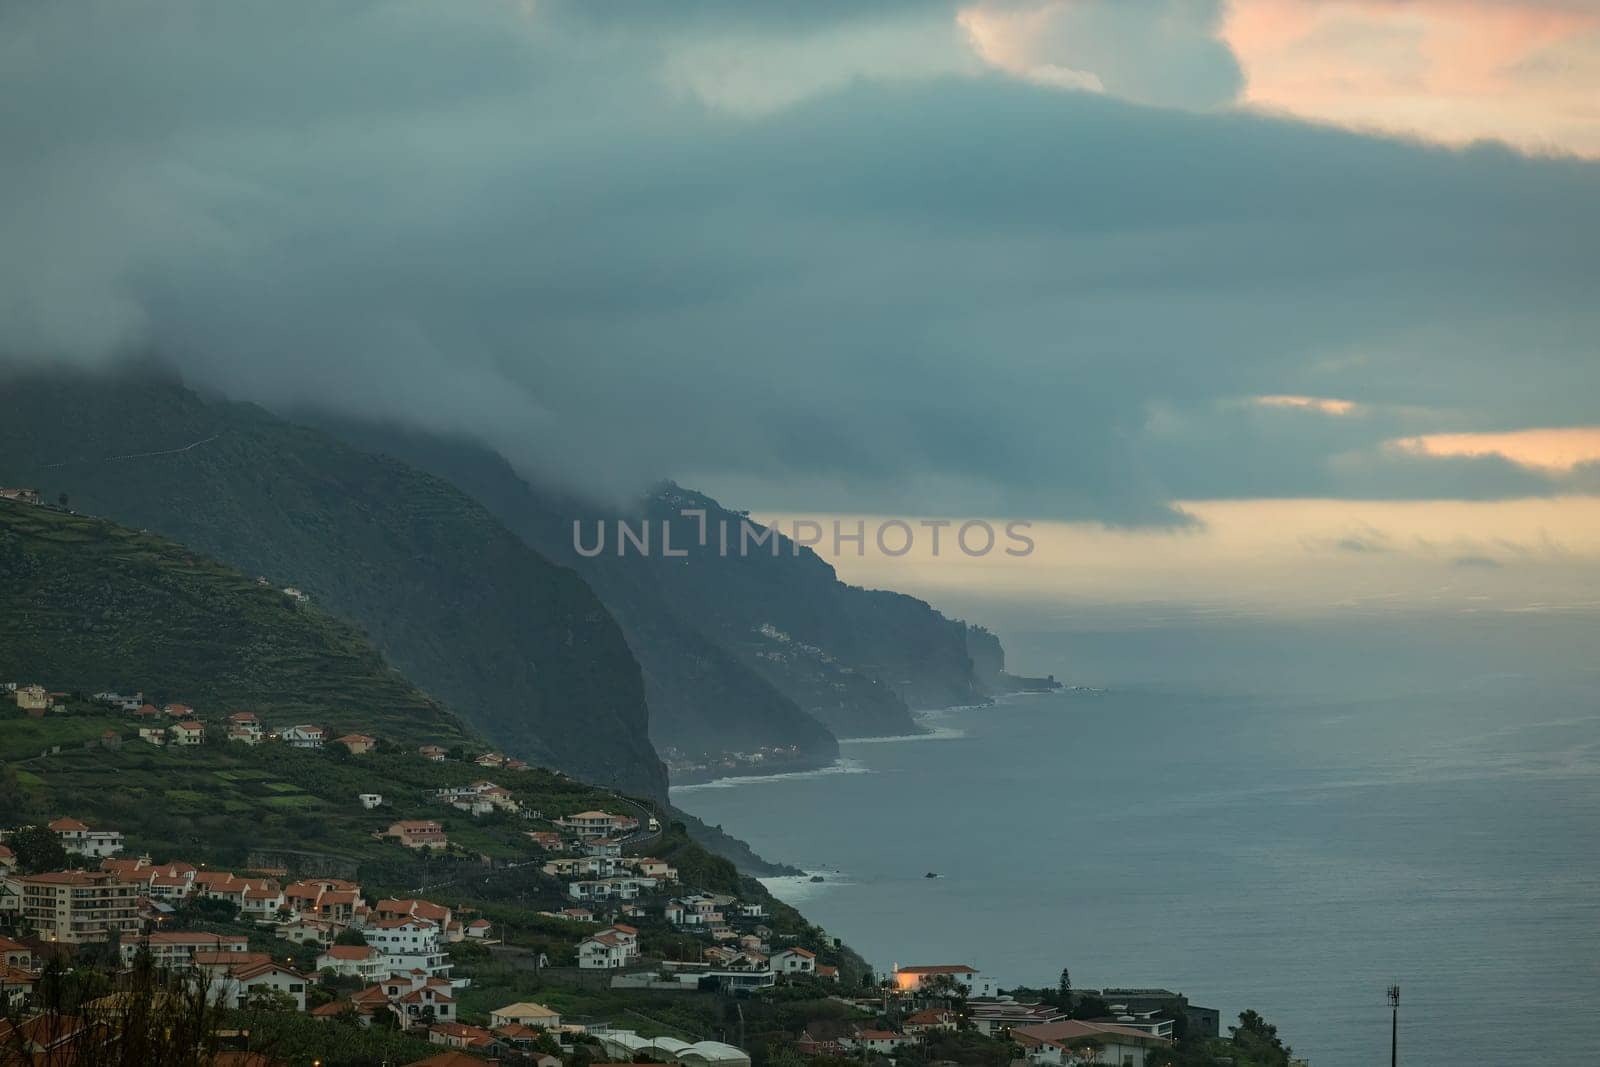 An awe-inspiring landscape of a coastal city, with its majestic mountains reaching out to the sea and surrounded by fog filled clouds. Madeira, Spain